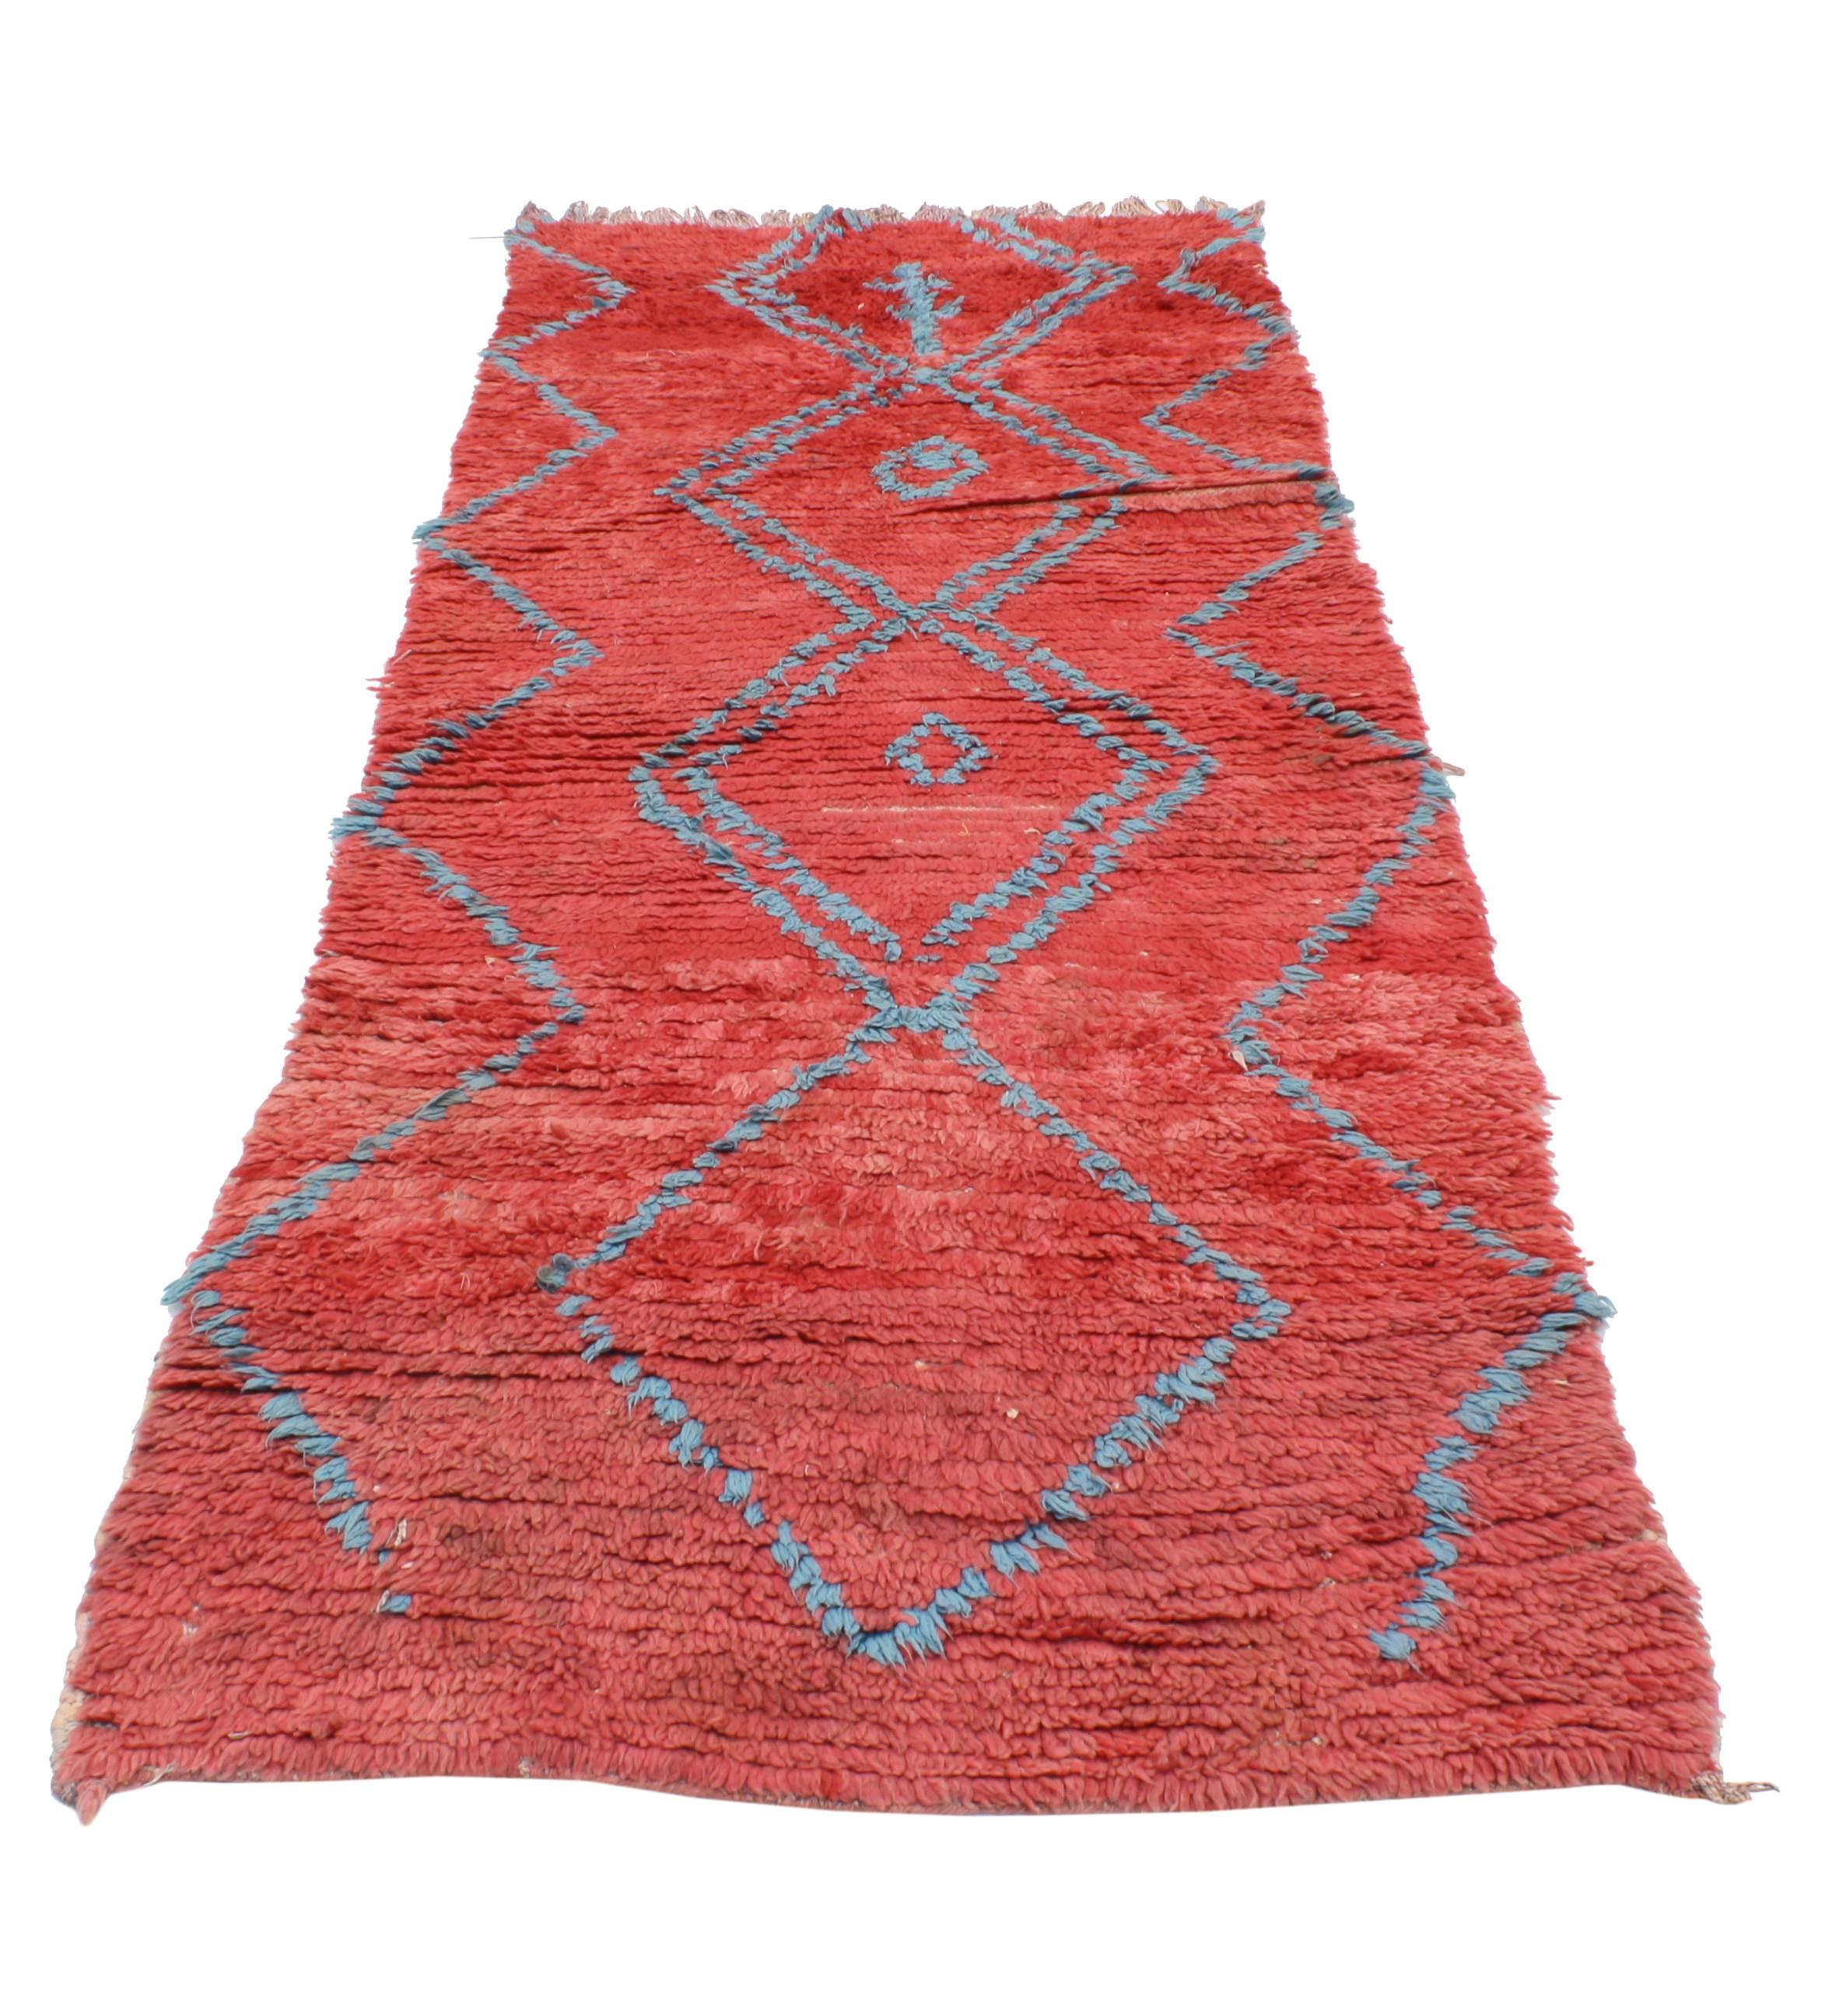 Hand-Knotted Vintage Berber Moroccan Runner with Modern Tribal Design